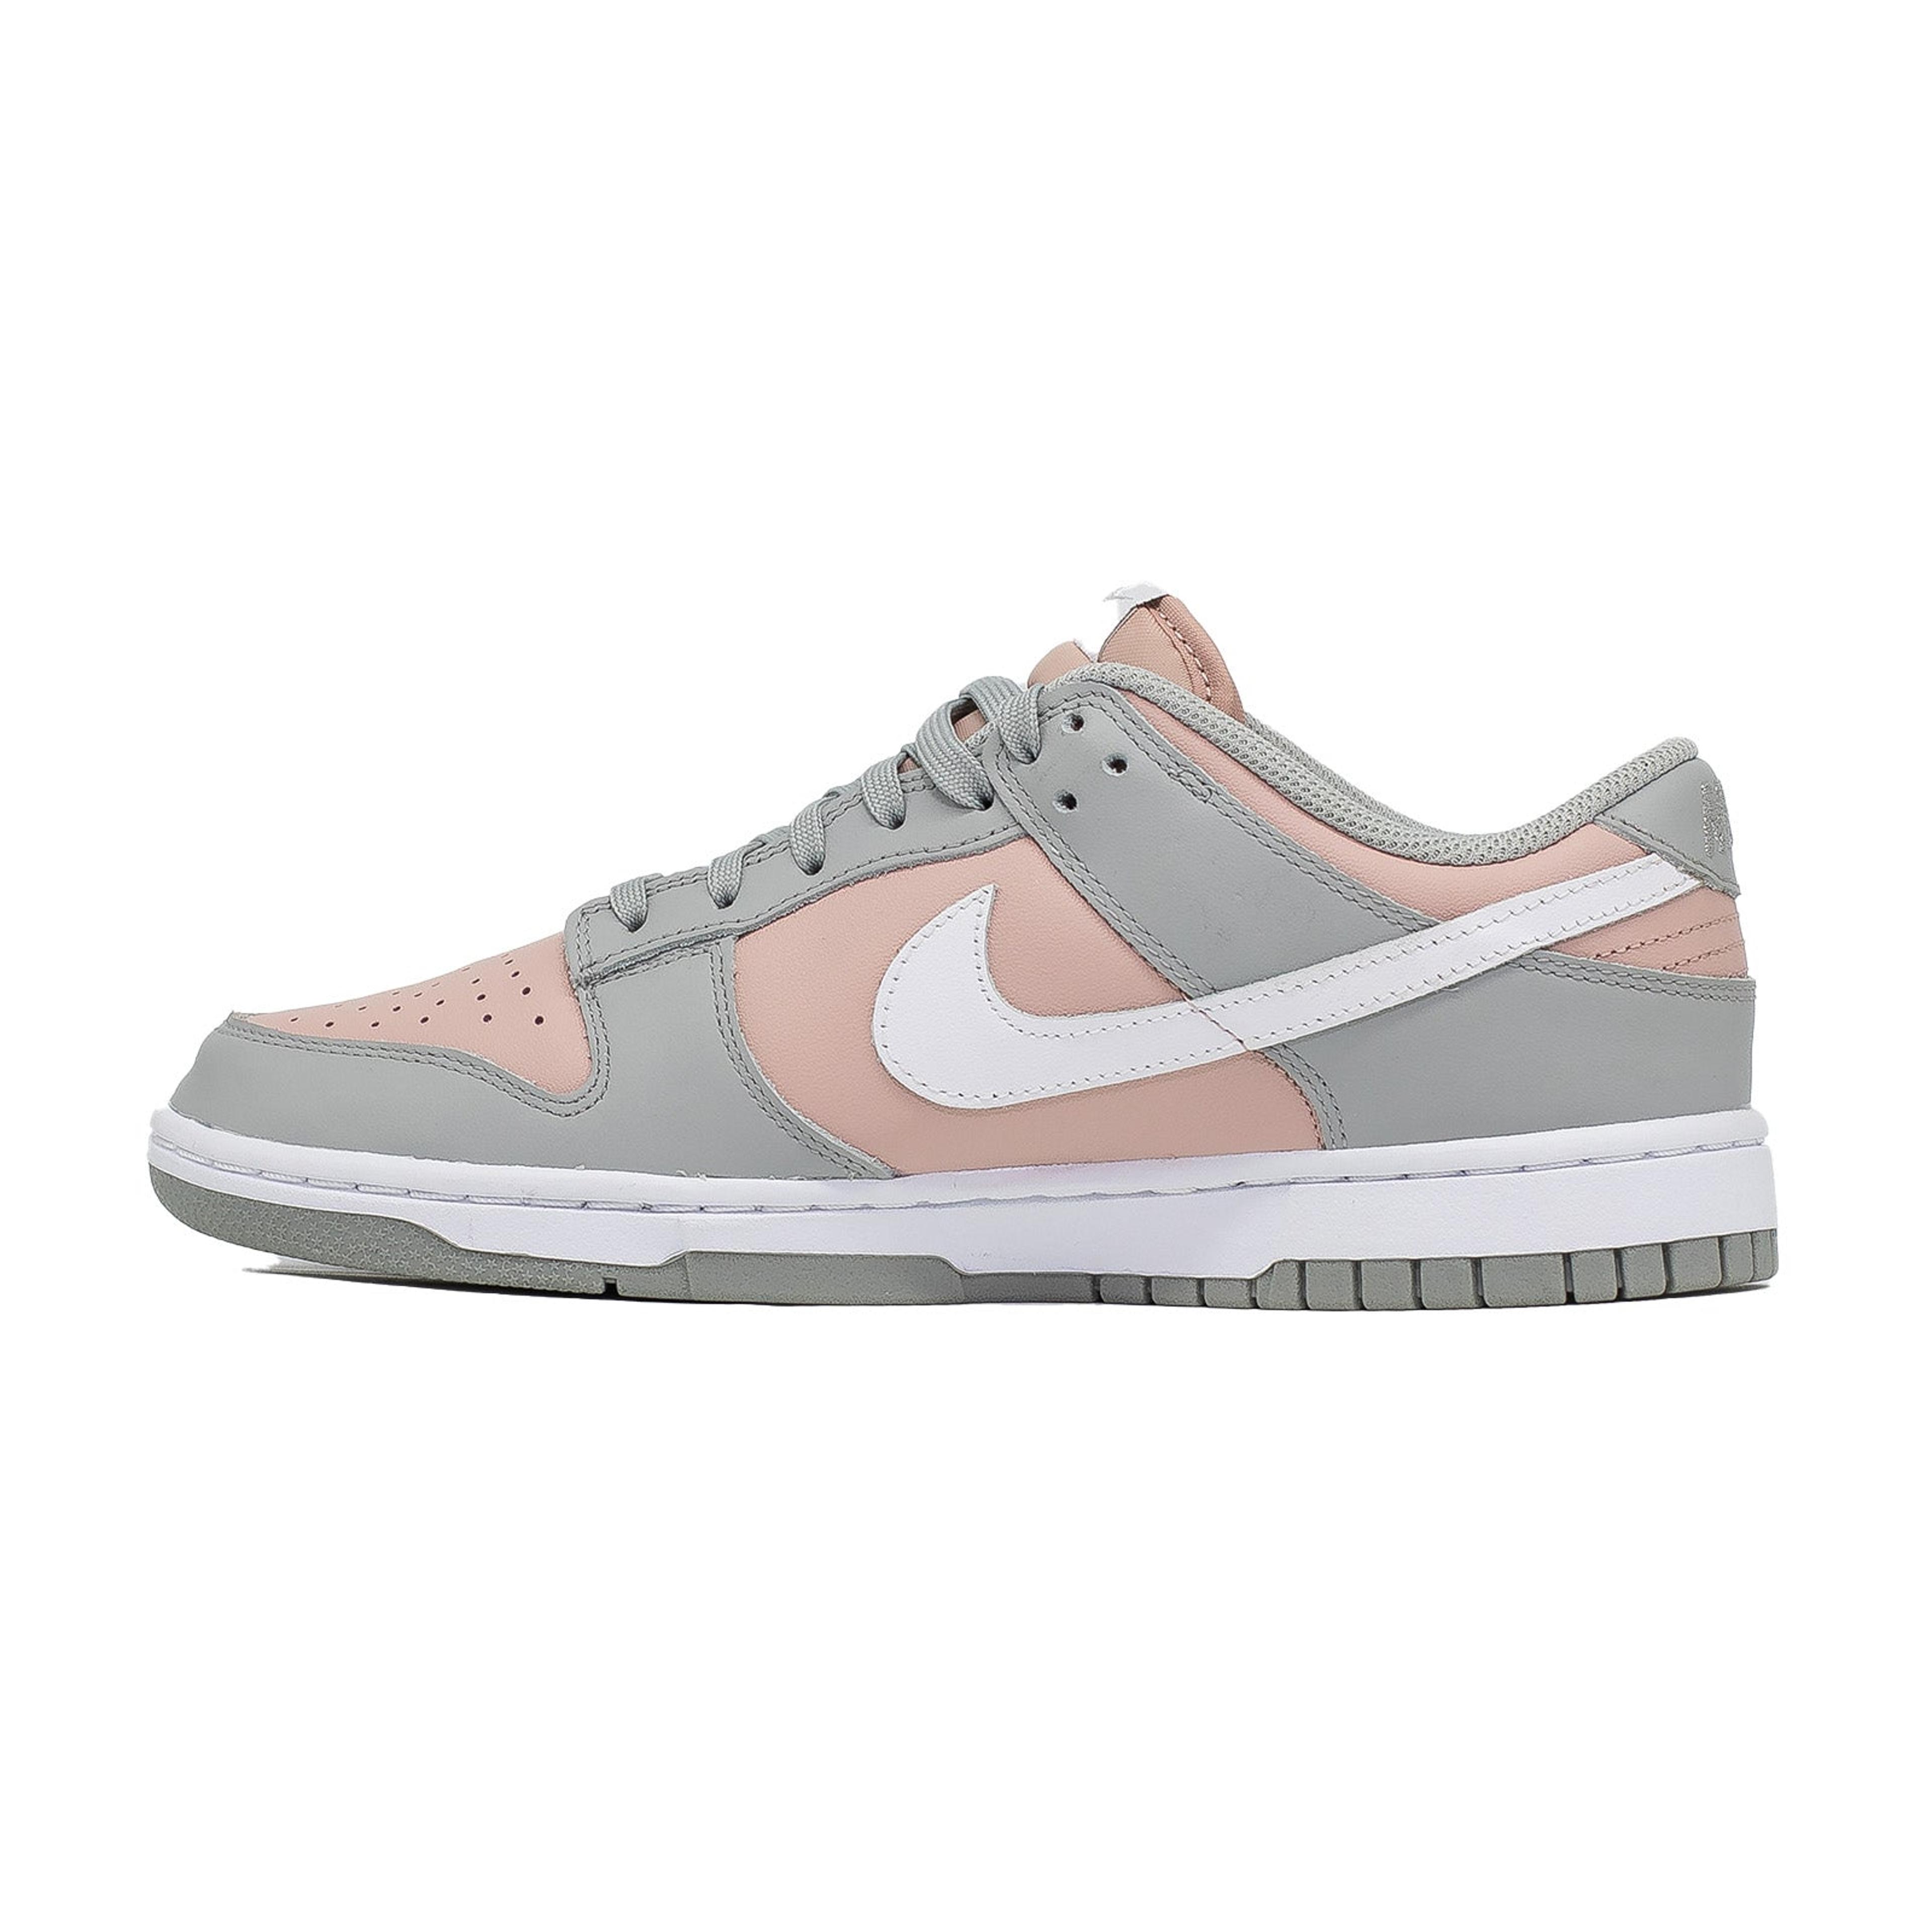 Alternate View 1 of Women's Nike Dunk Low, Pink Oxford